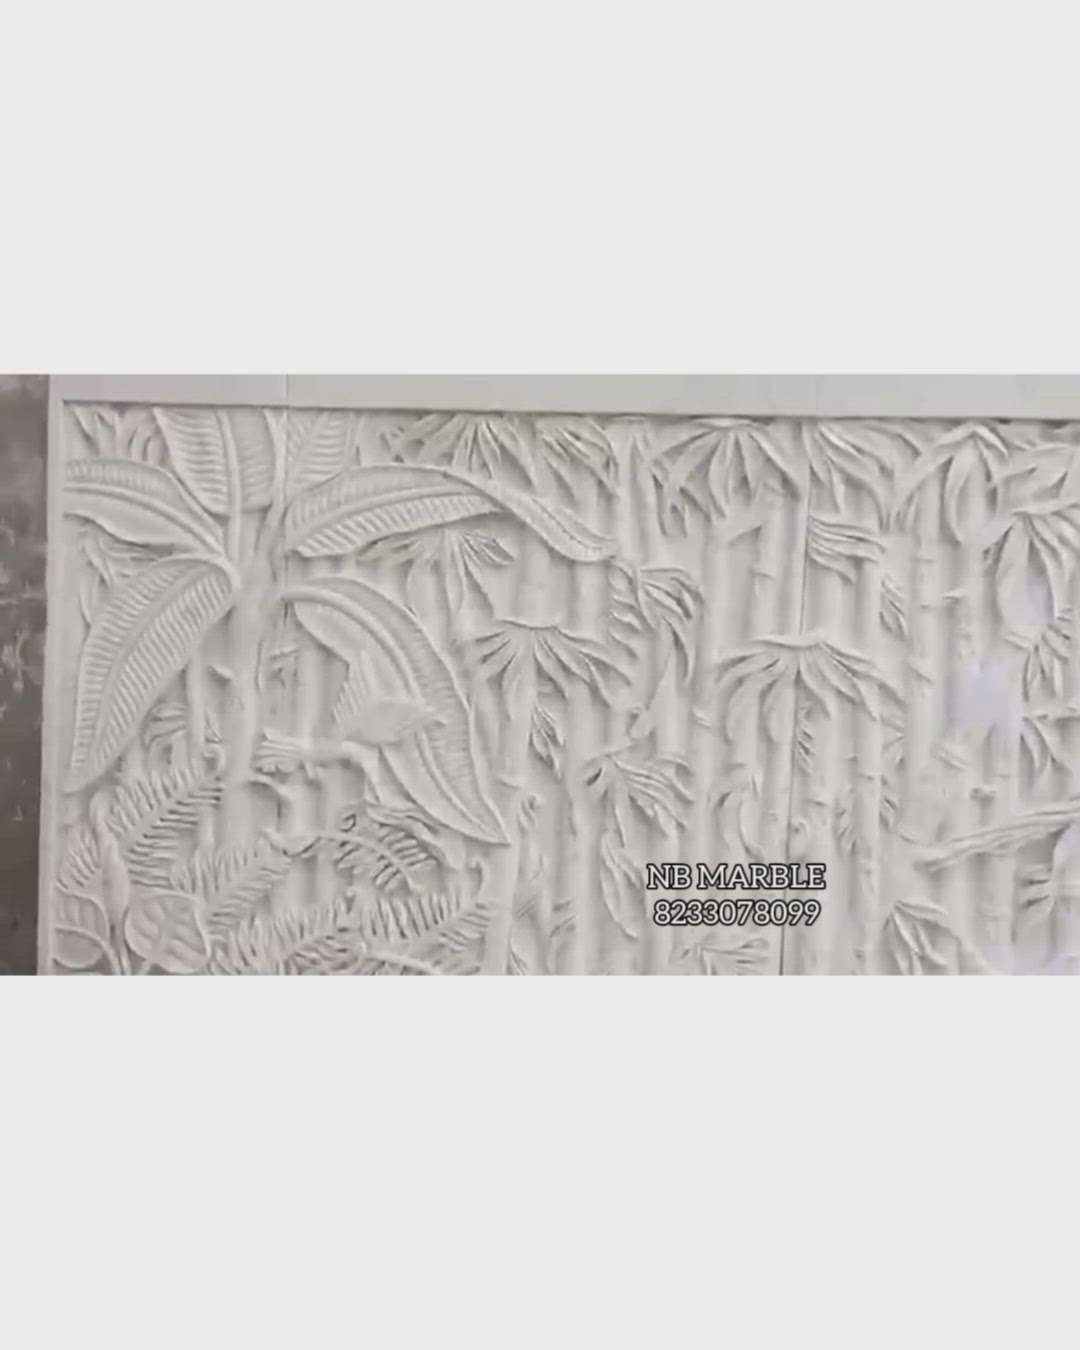 White Marble Carving Panel Work

Decor your Wall with beautiful carving Wall panel

We are manufacturer of marble and sandstone Wall panel

We make any design according to your requirement and size

Follow me on Instagram
@nbmarble

More Information Contact Me
8233078099

#carving #panel #nbmarble #interiorwalls #wallpaperdecor #wallcarving #marblefeaturewall #whitemarble #sculpture